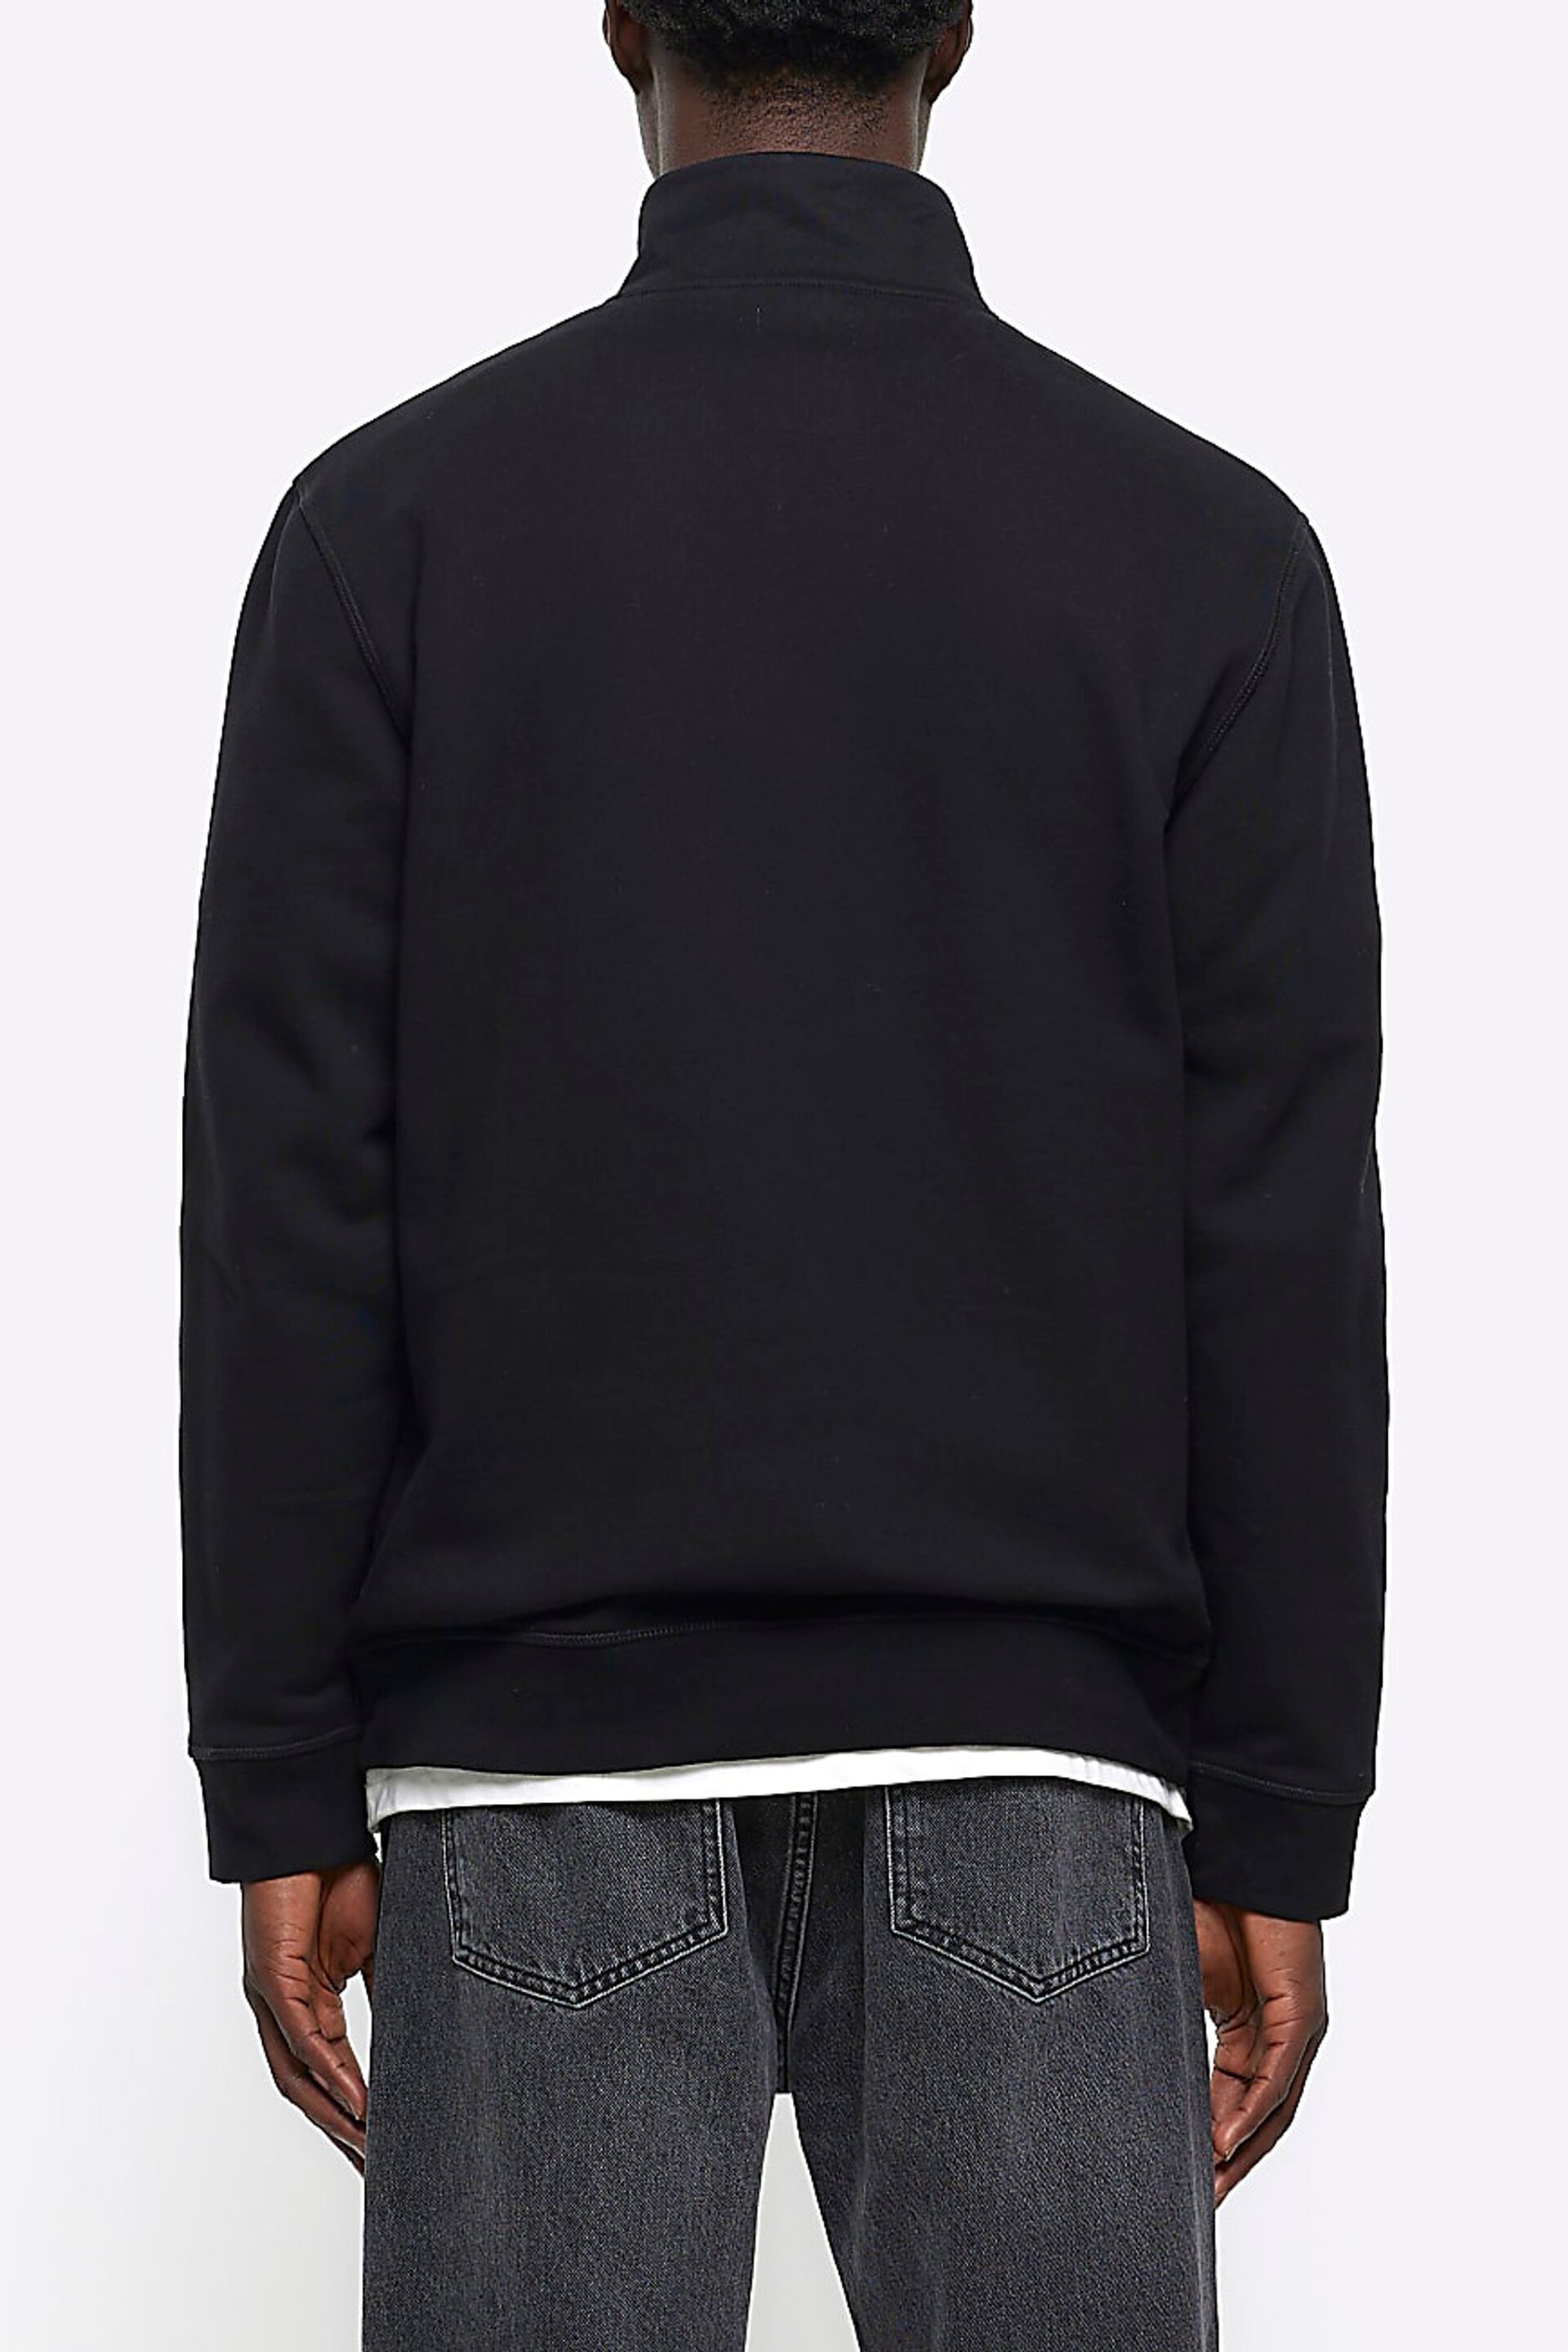 River Island Black Funnel Neck Polo Hoodie - Image 2 of 4